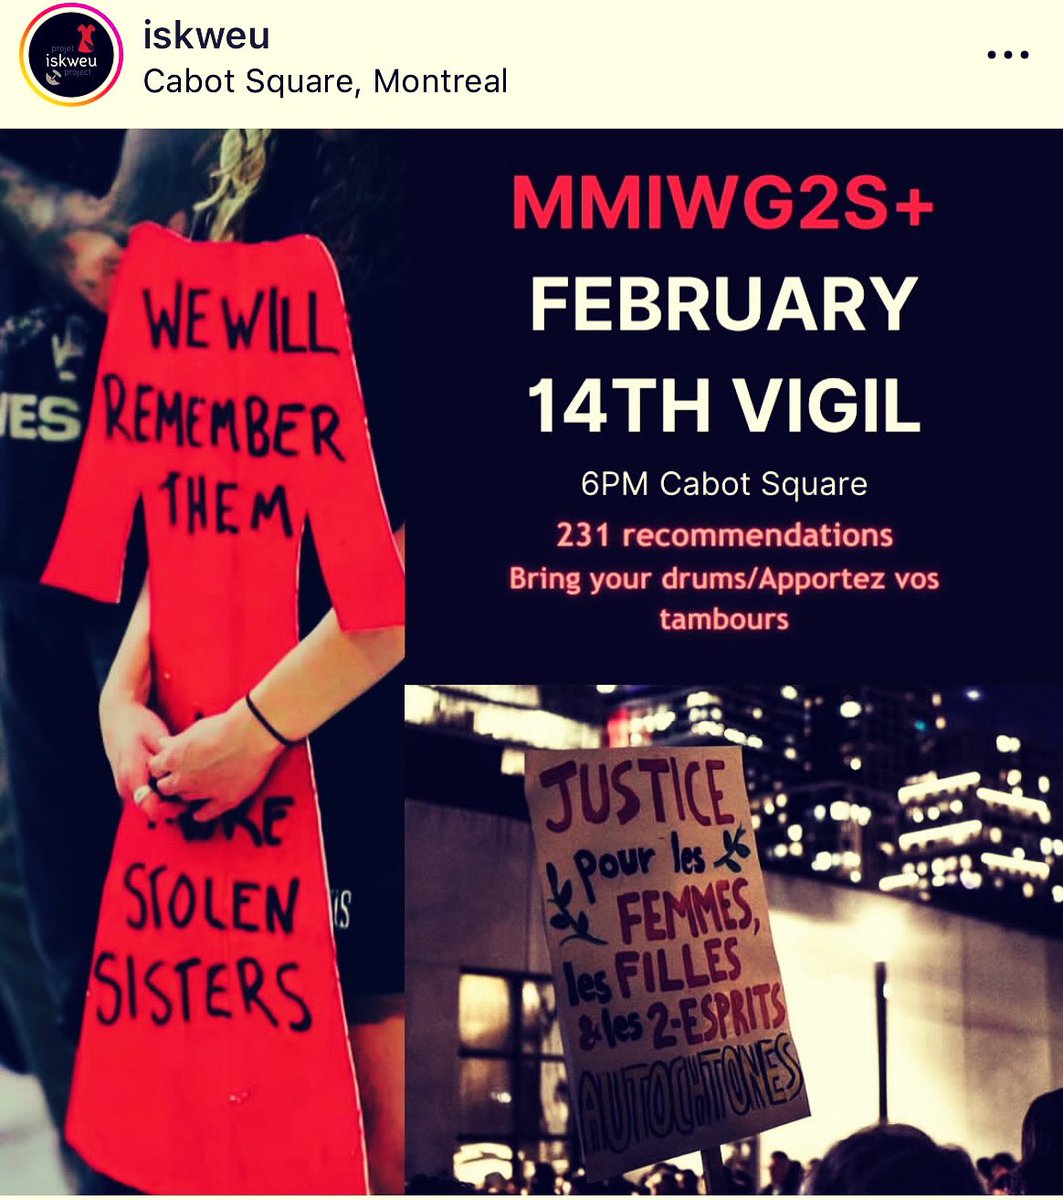 On this day of remembrance of MMIWG2S, join us at Cabot 🔲 6:00pm, hosted by The Iskweu Project and the Centre for Gender Advocacy. Speakers include Kevin Deer, Ellen Gabriel, Hilda Anderson-Pyrz, Irene Qavavauq, Sarah Carrier, Angela Ottereyes and many more❤️